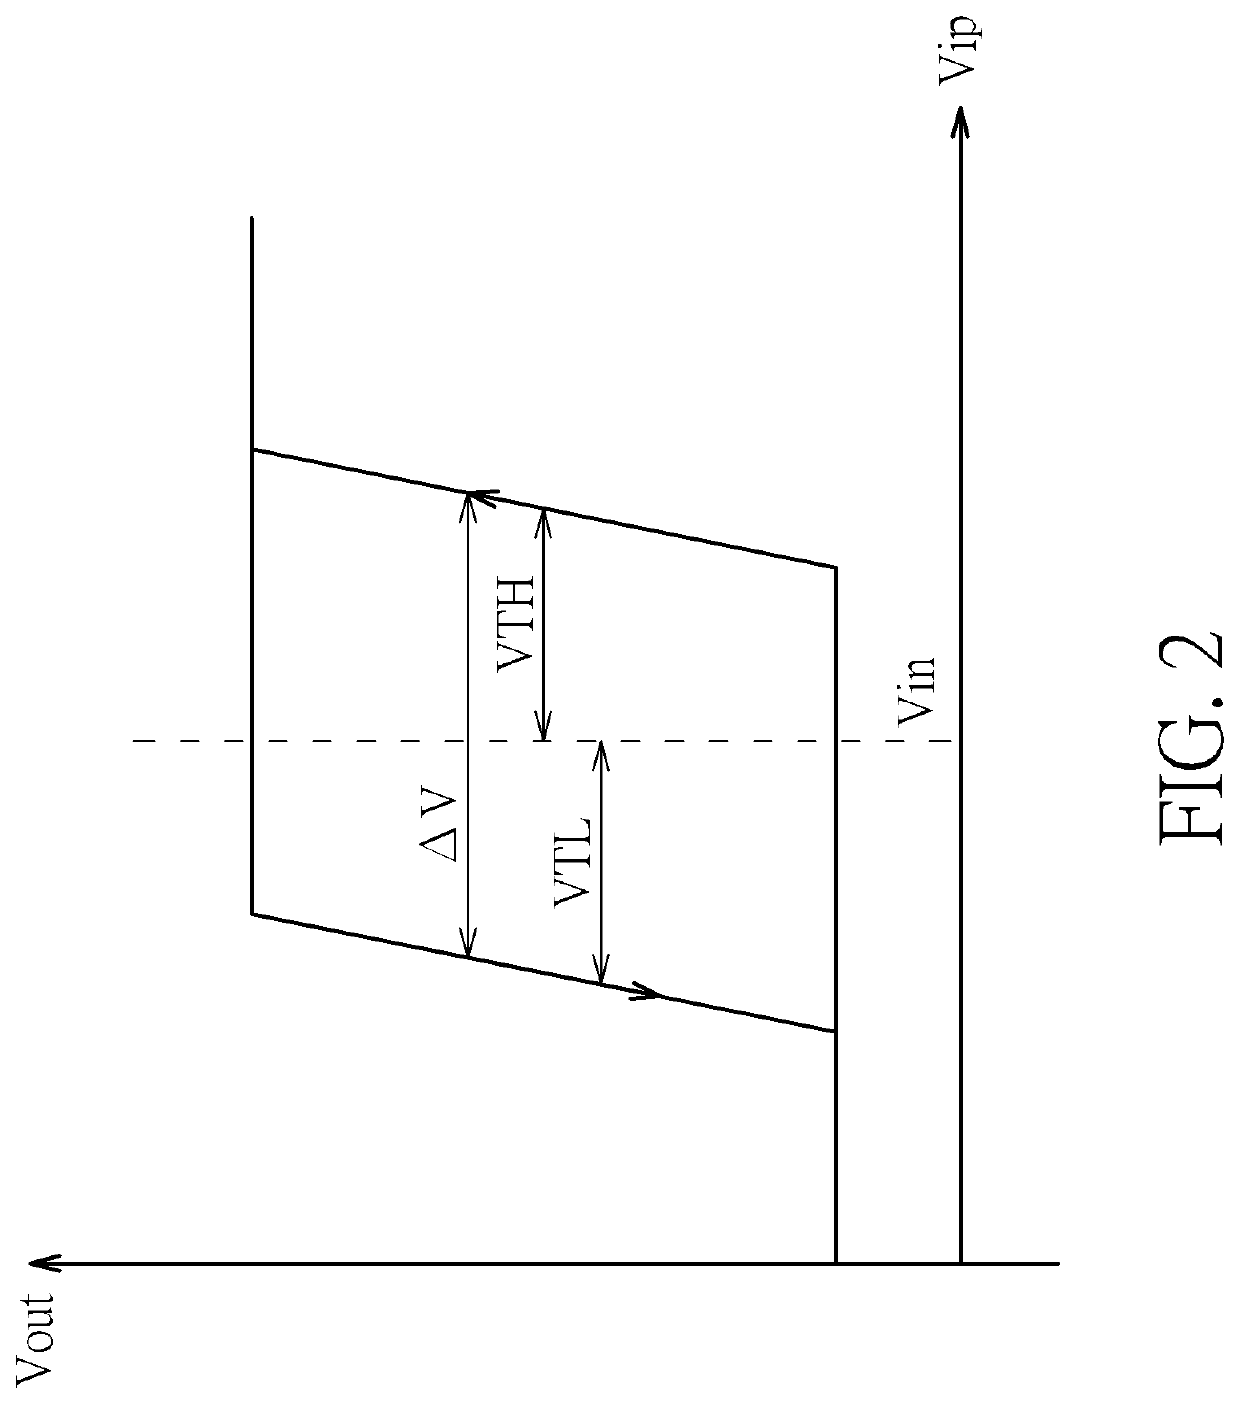 Hysteresis comparator